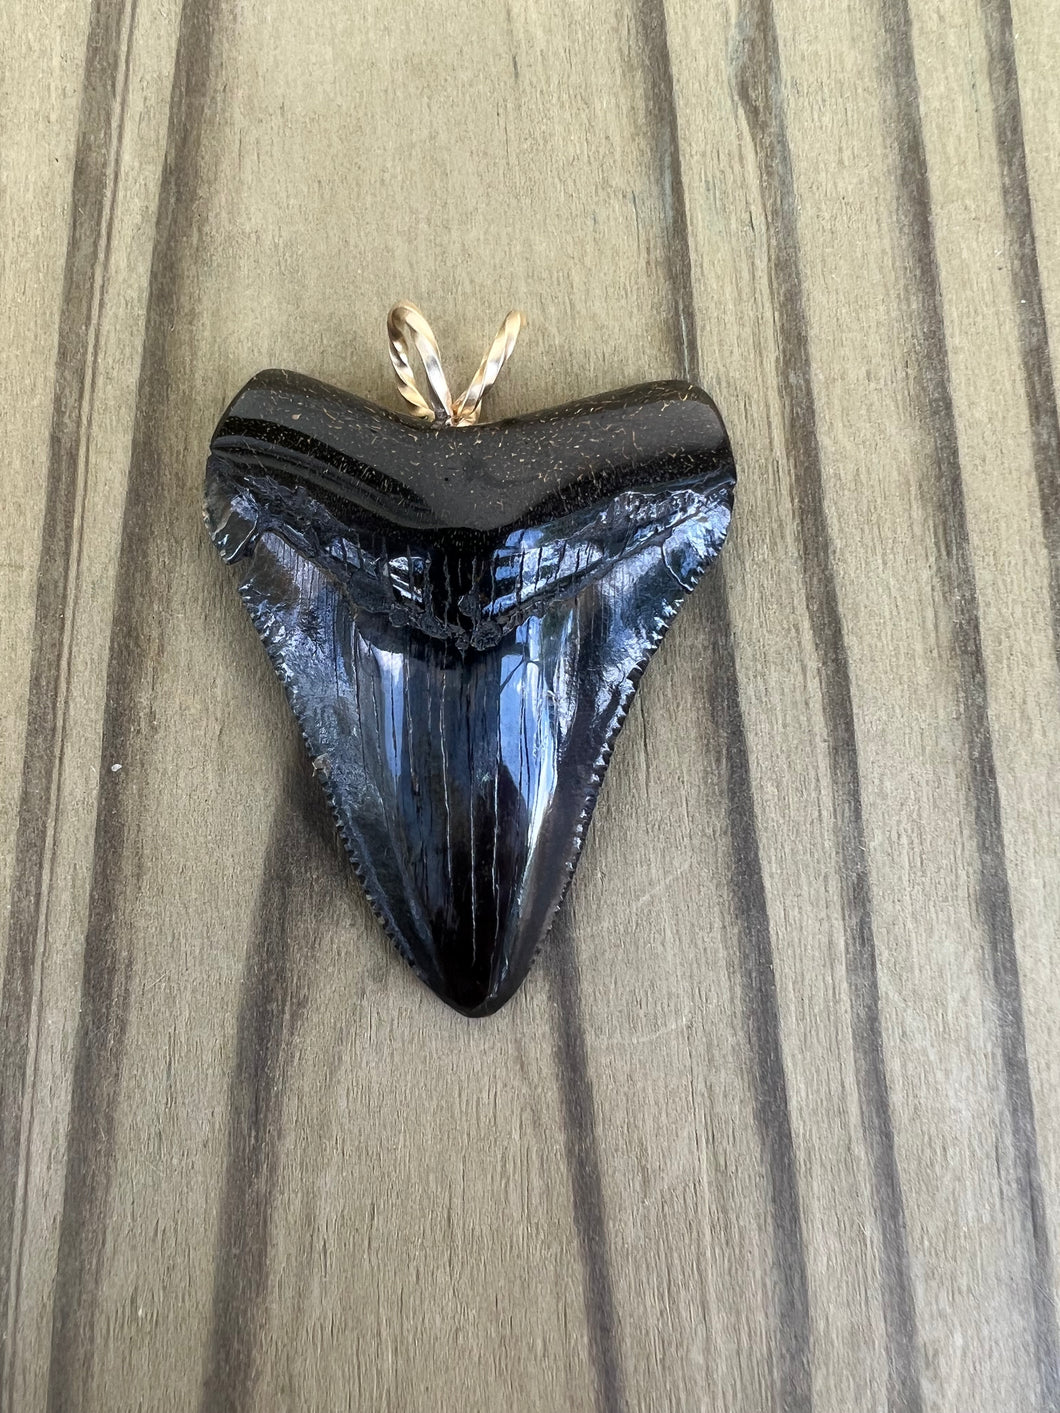 1 3/4 Inch Polished Megalodon Shark Tooth Necklace